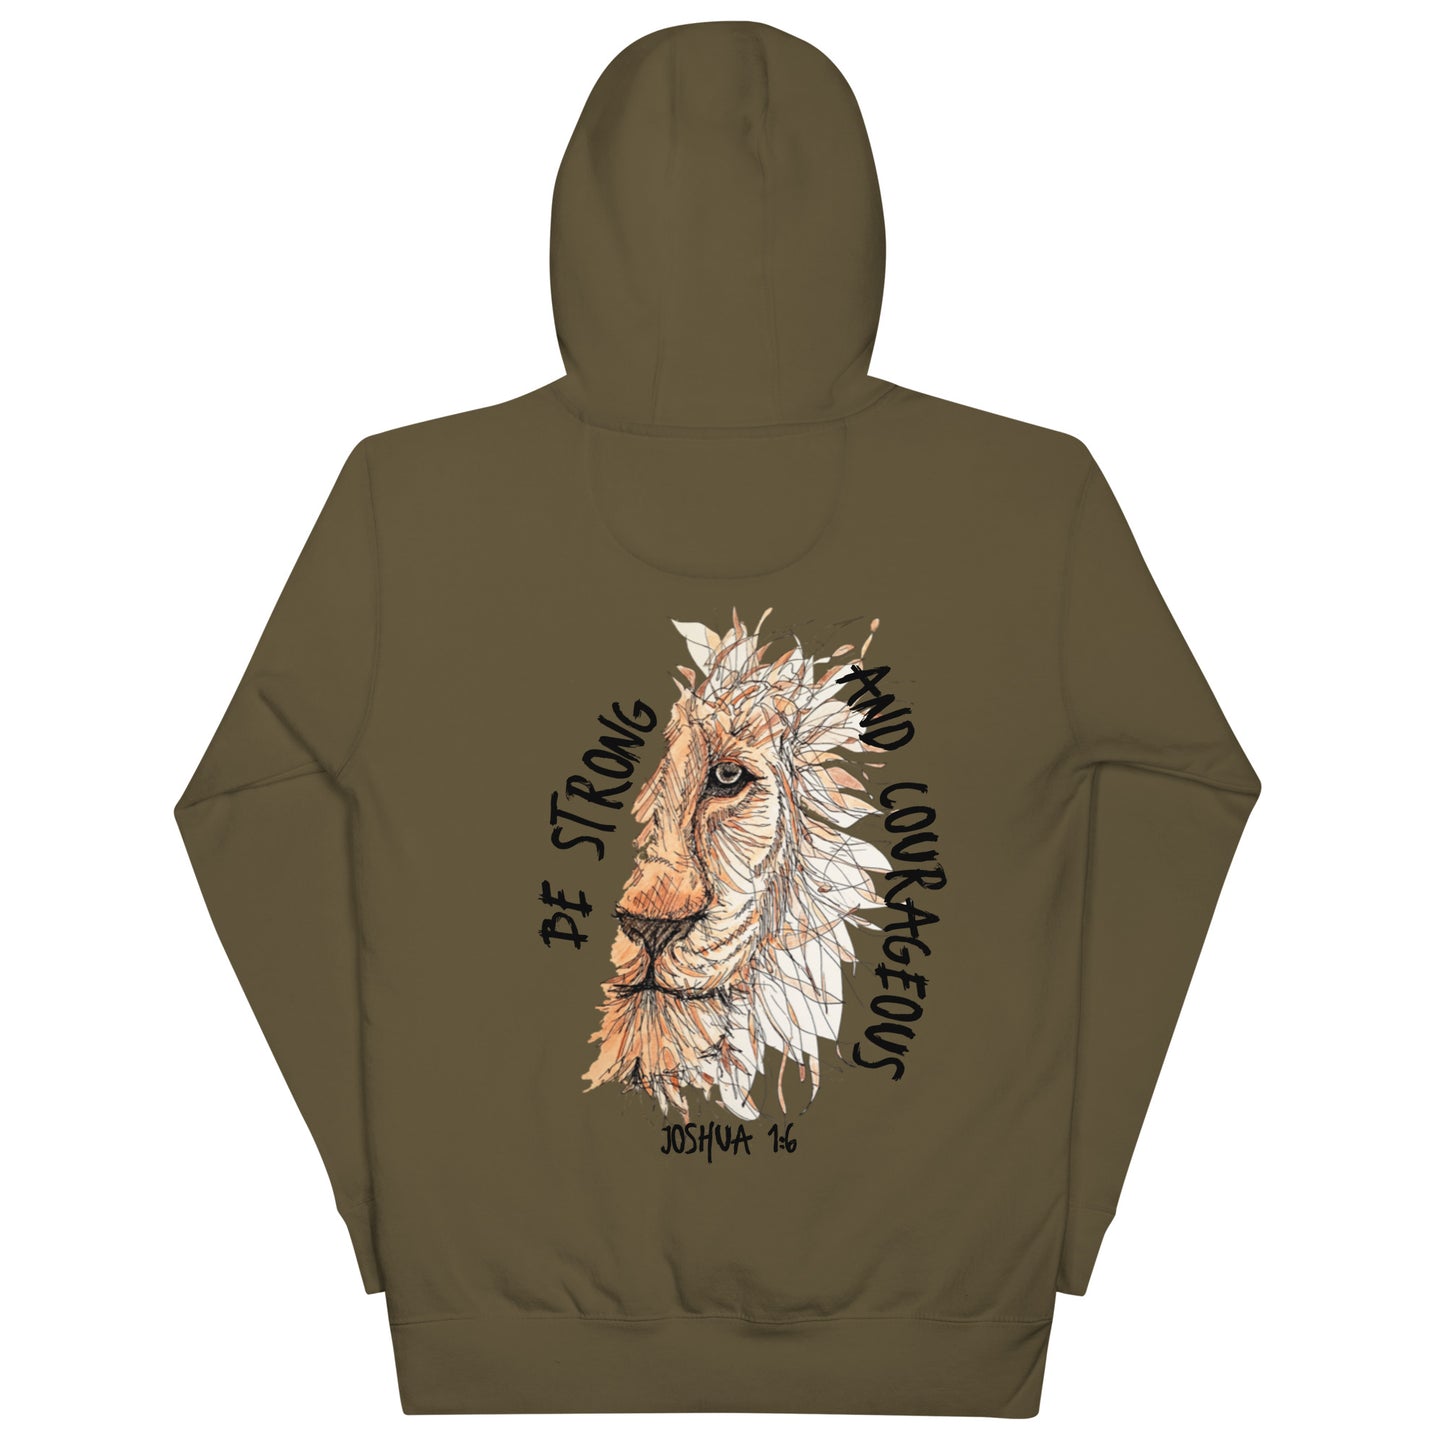 God Said "Be Strong and Courageous" Unisex Hoodie